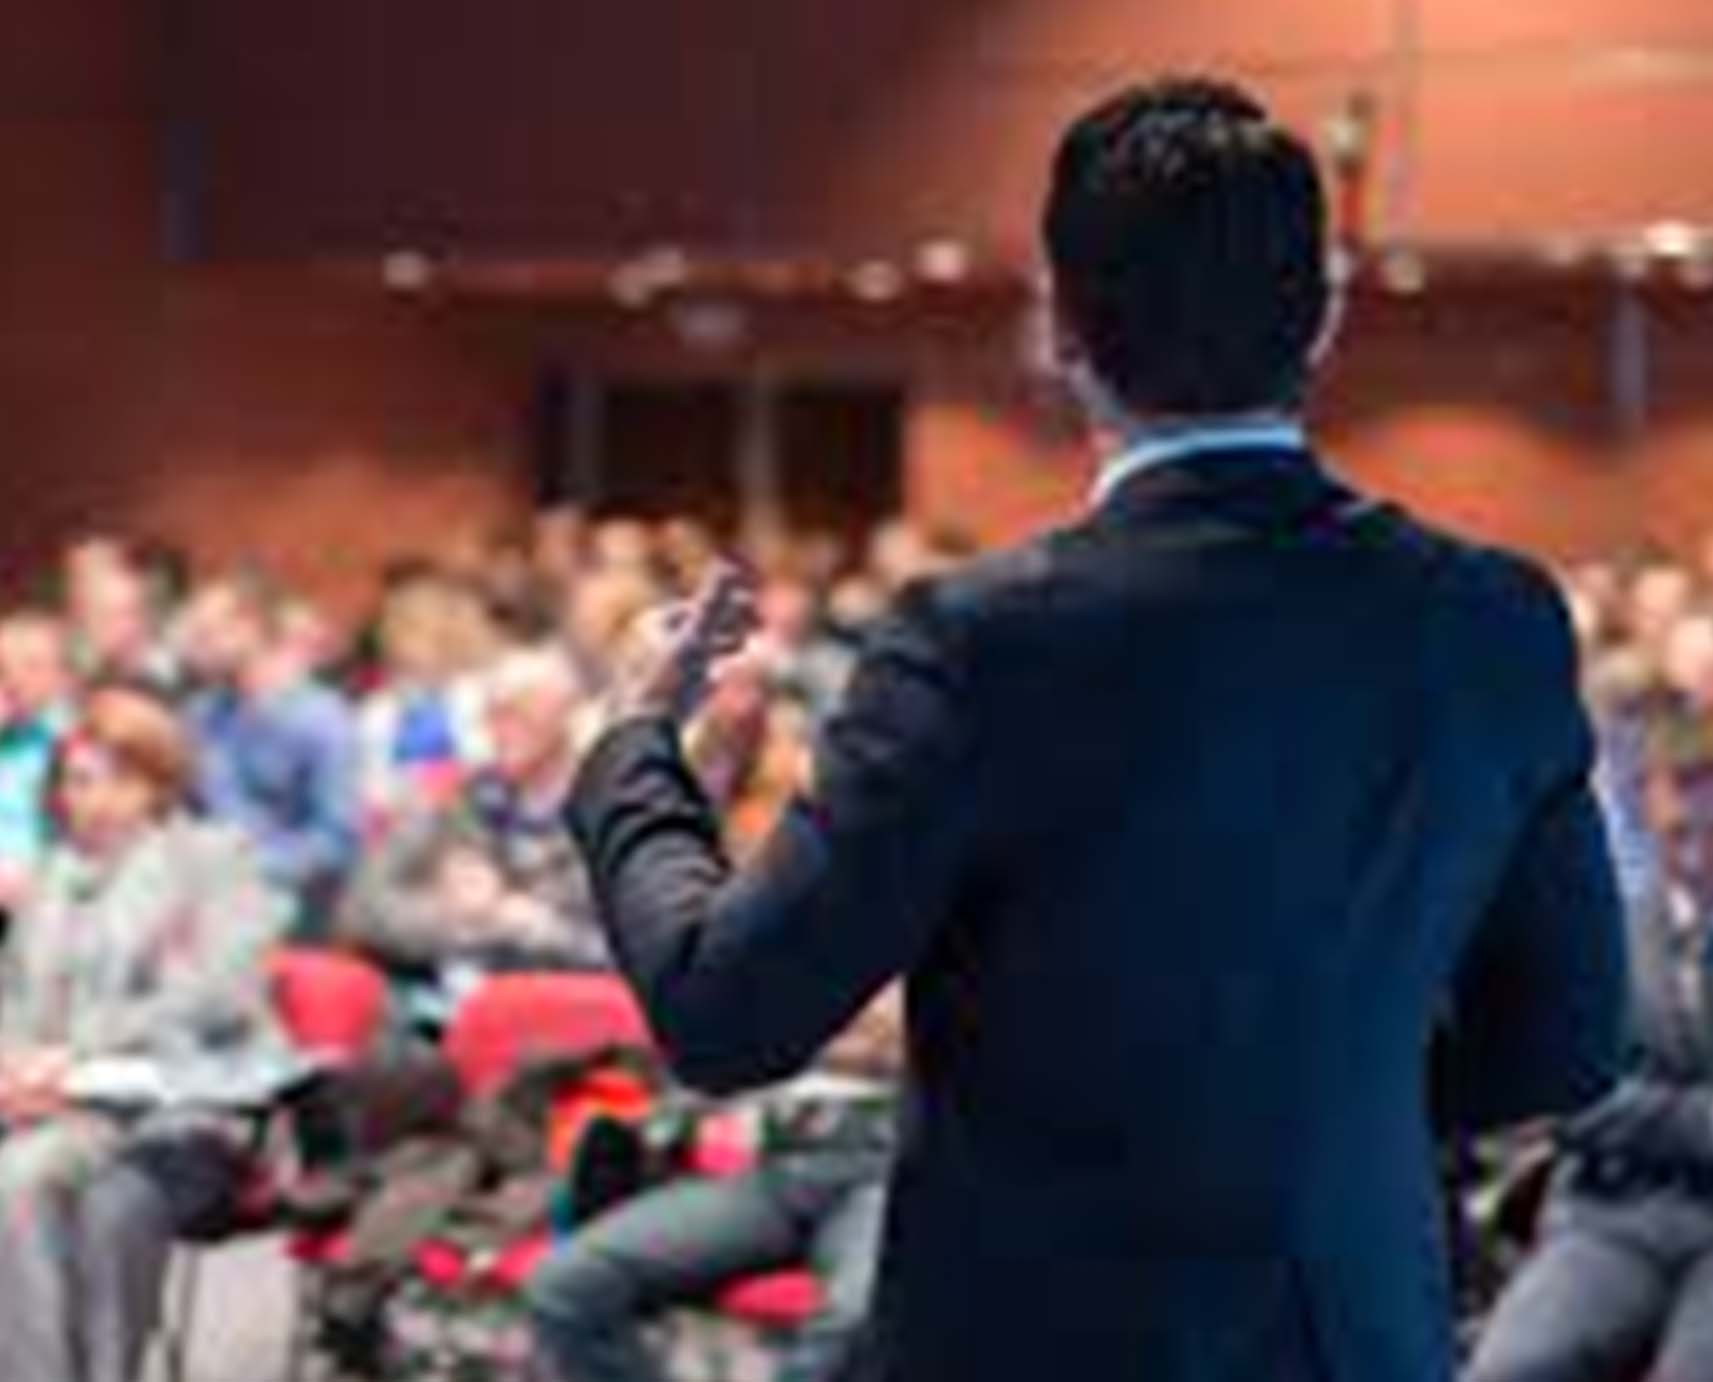 6 Methods to Find Your Conference's Keynote and Other Speakers